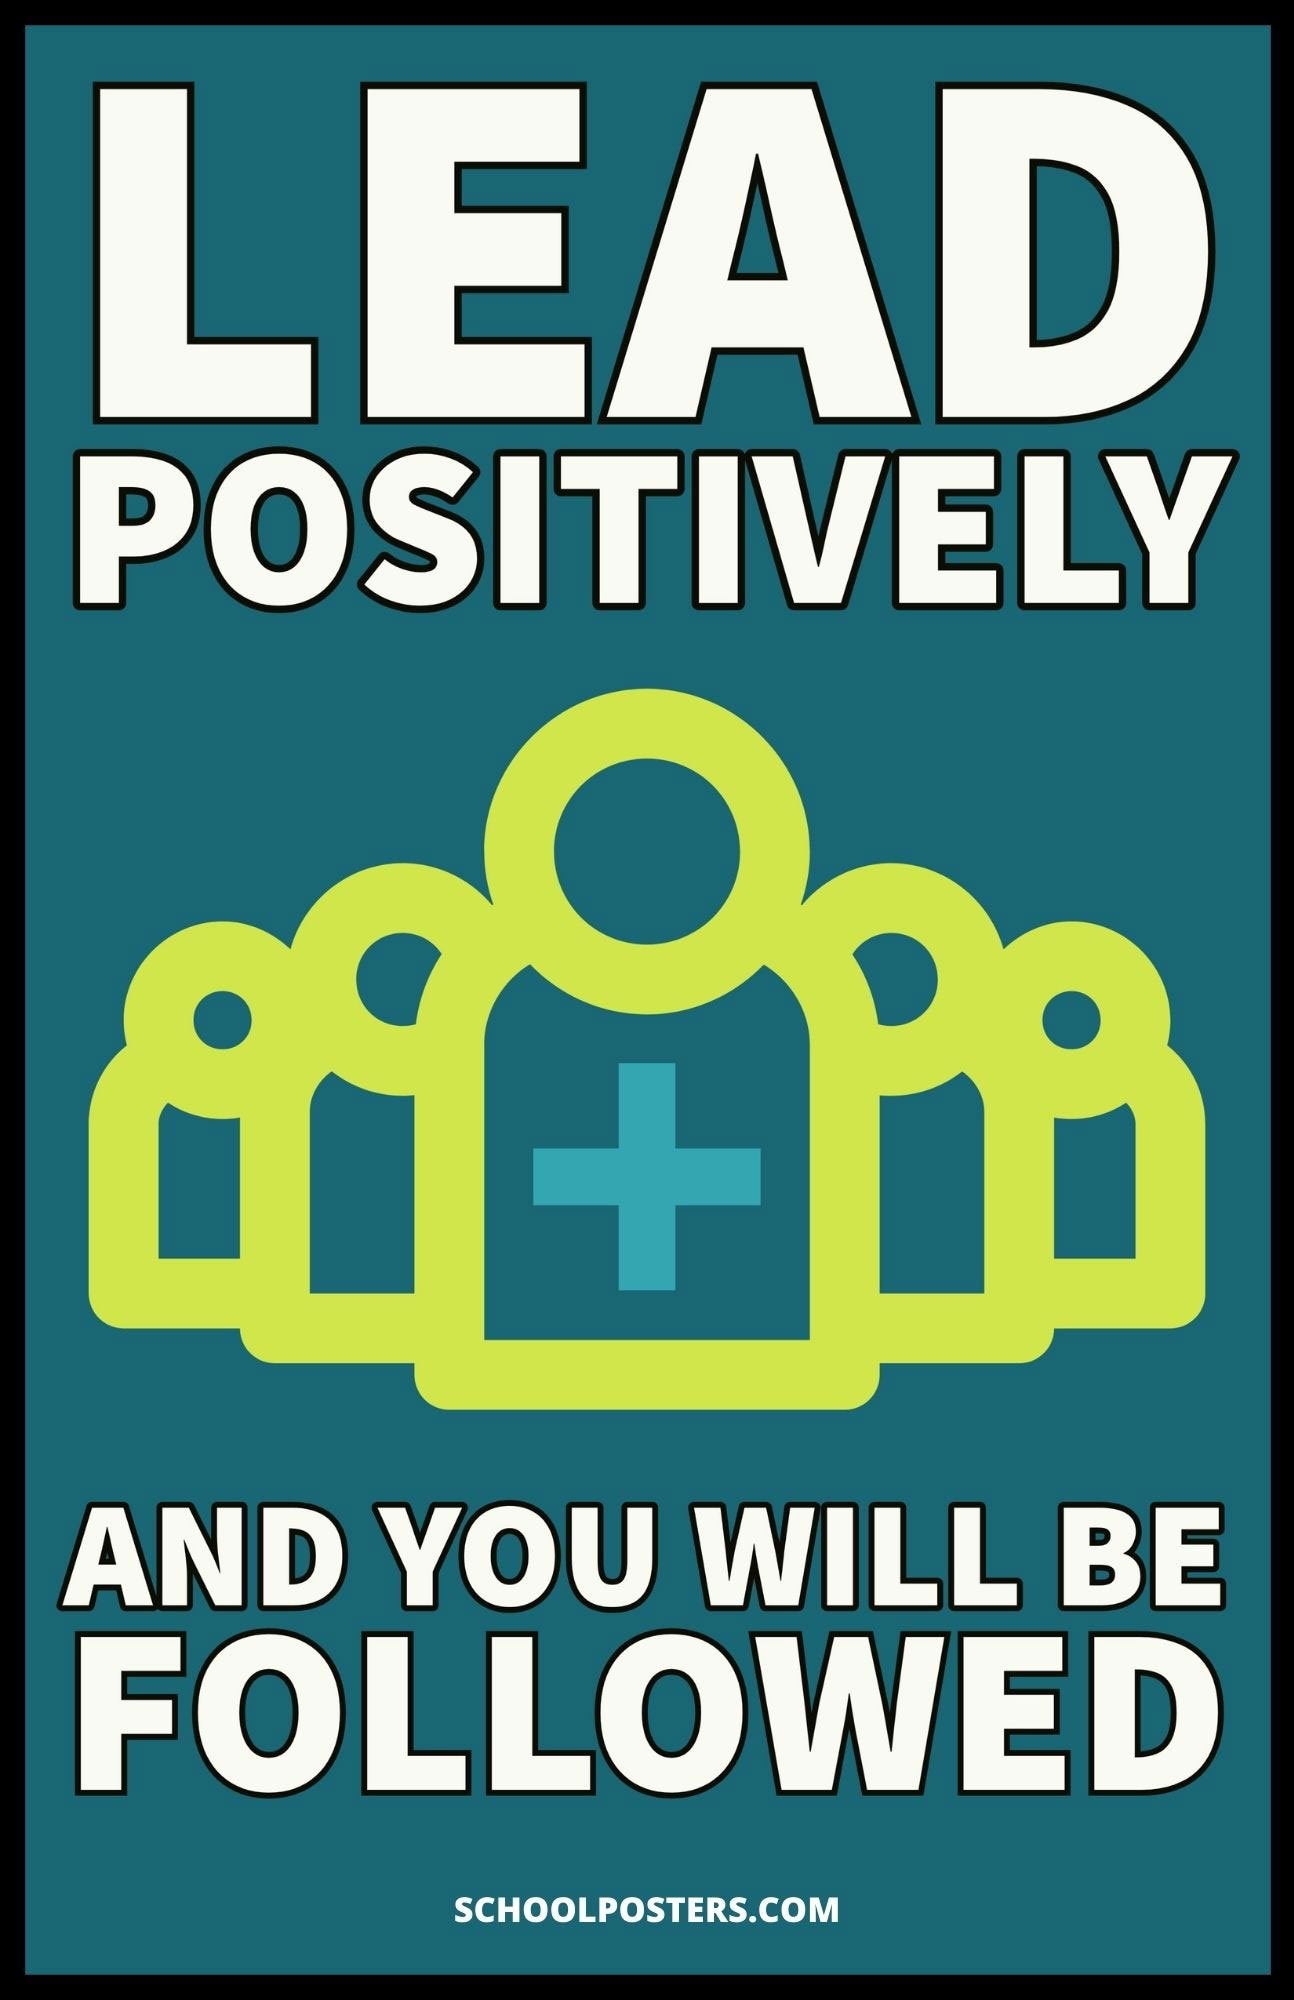 Lead Positively Poster